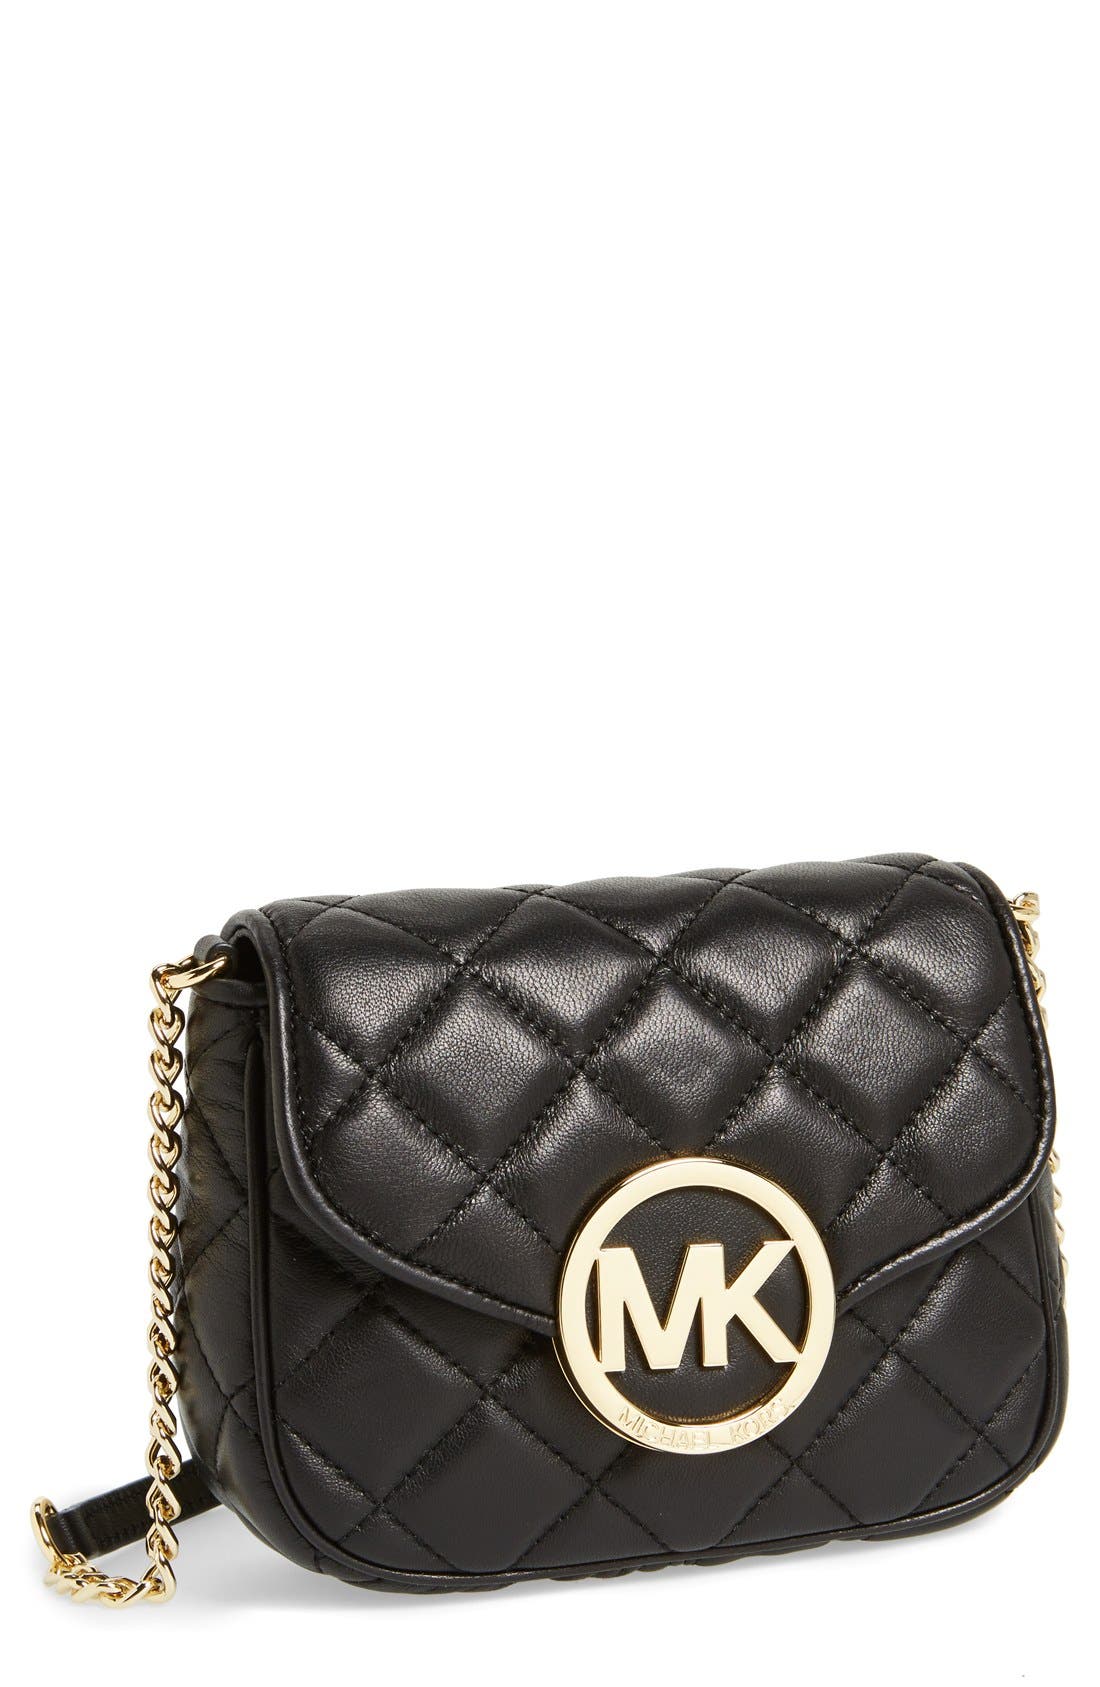 michael kors fulton quilted bag